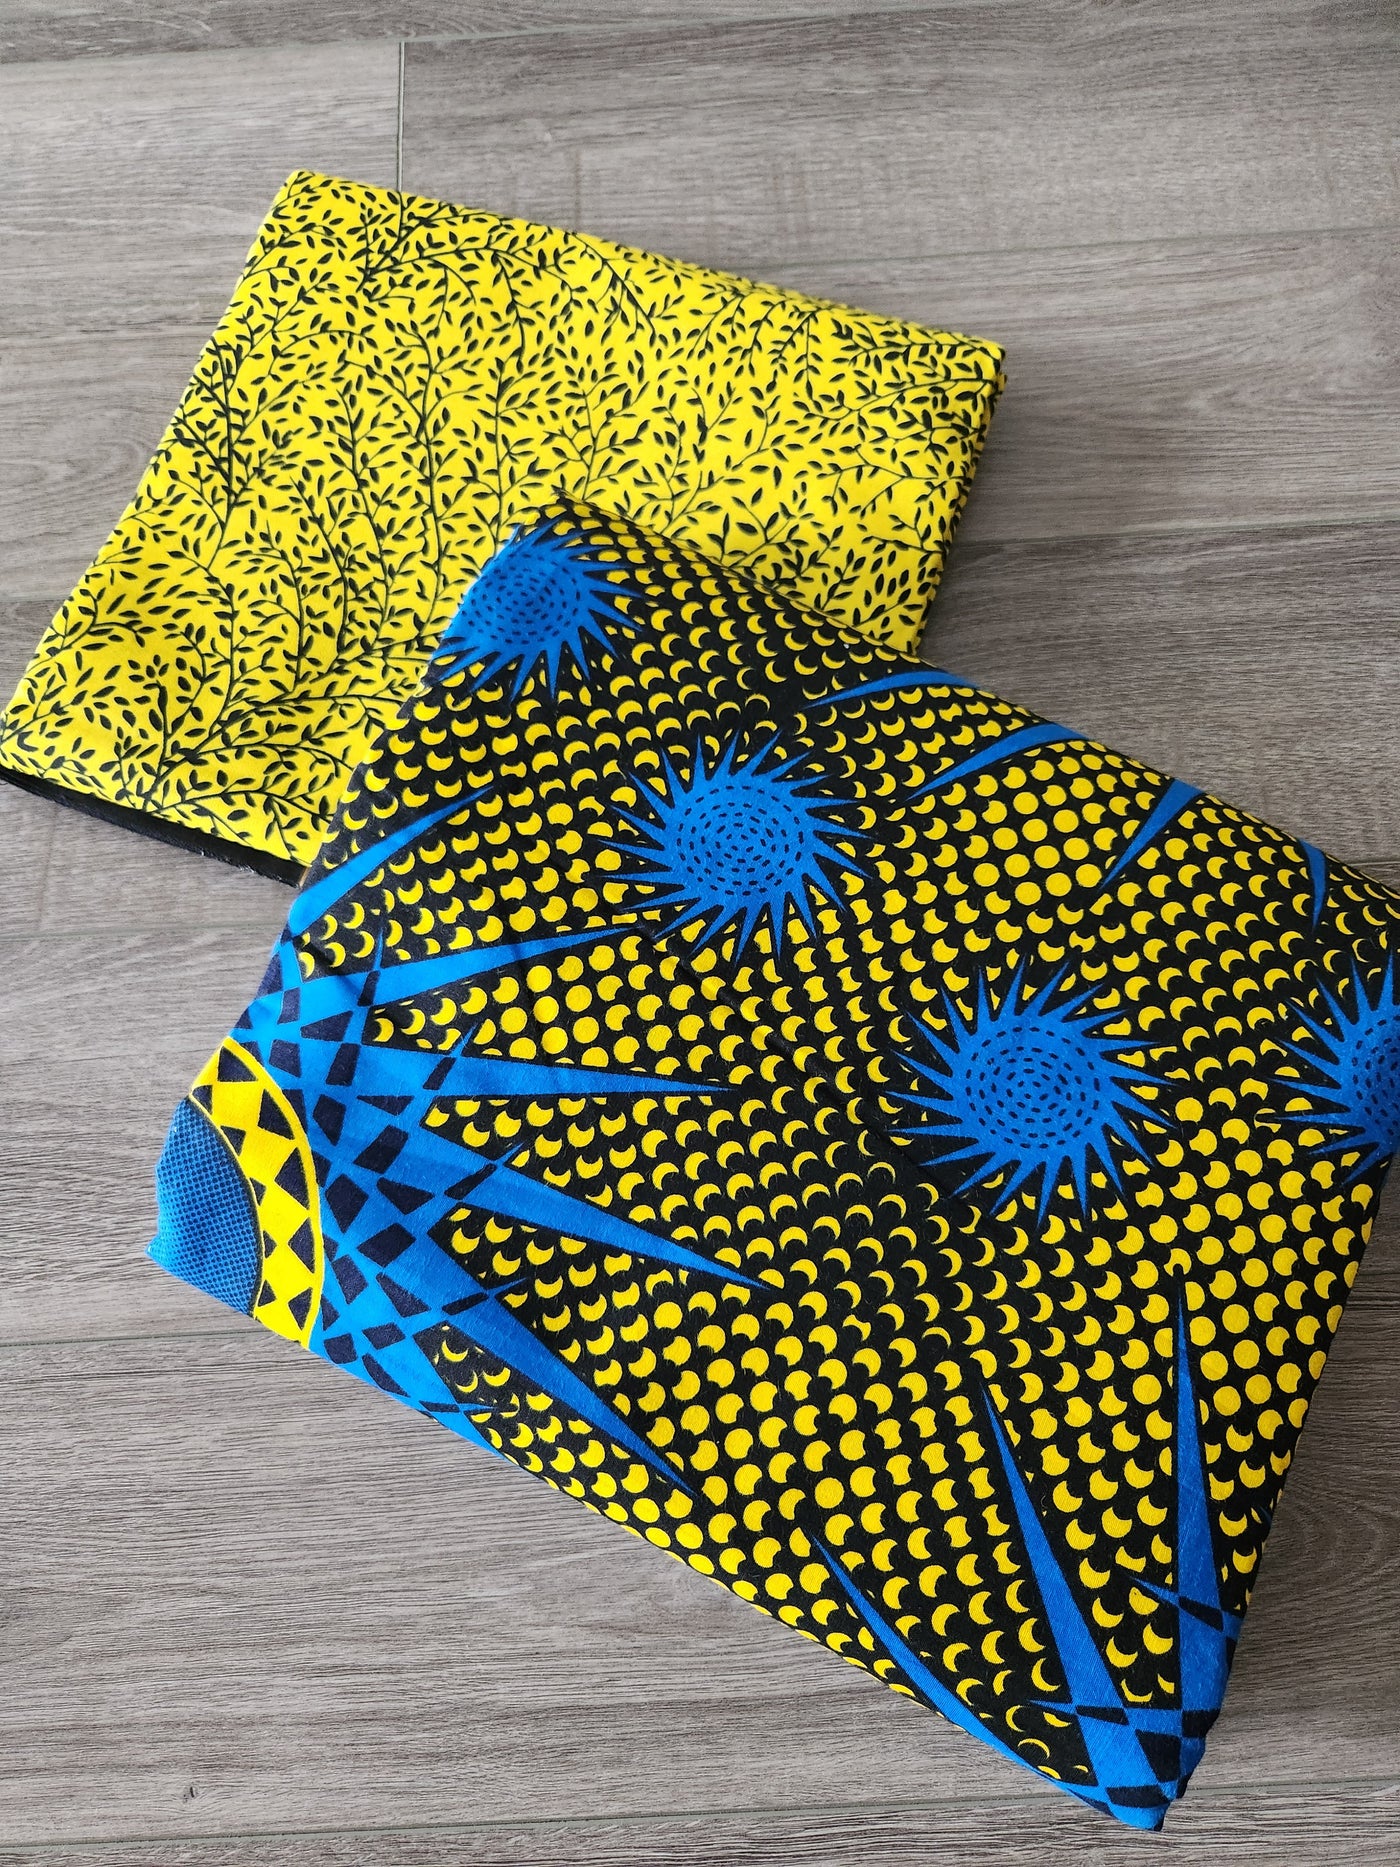 Mix and Match African Fabric